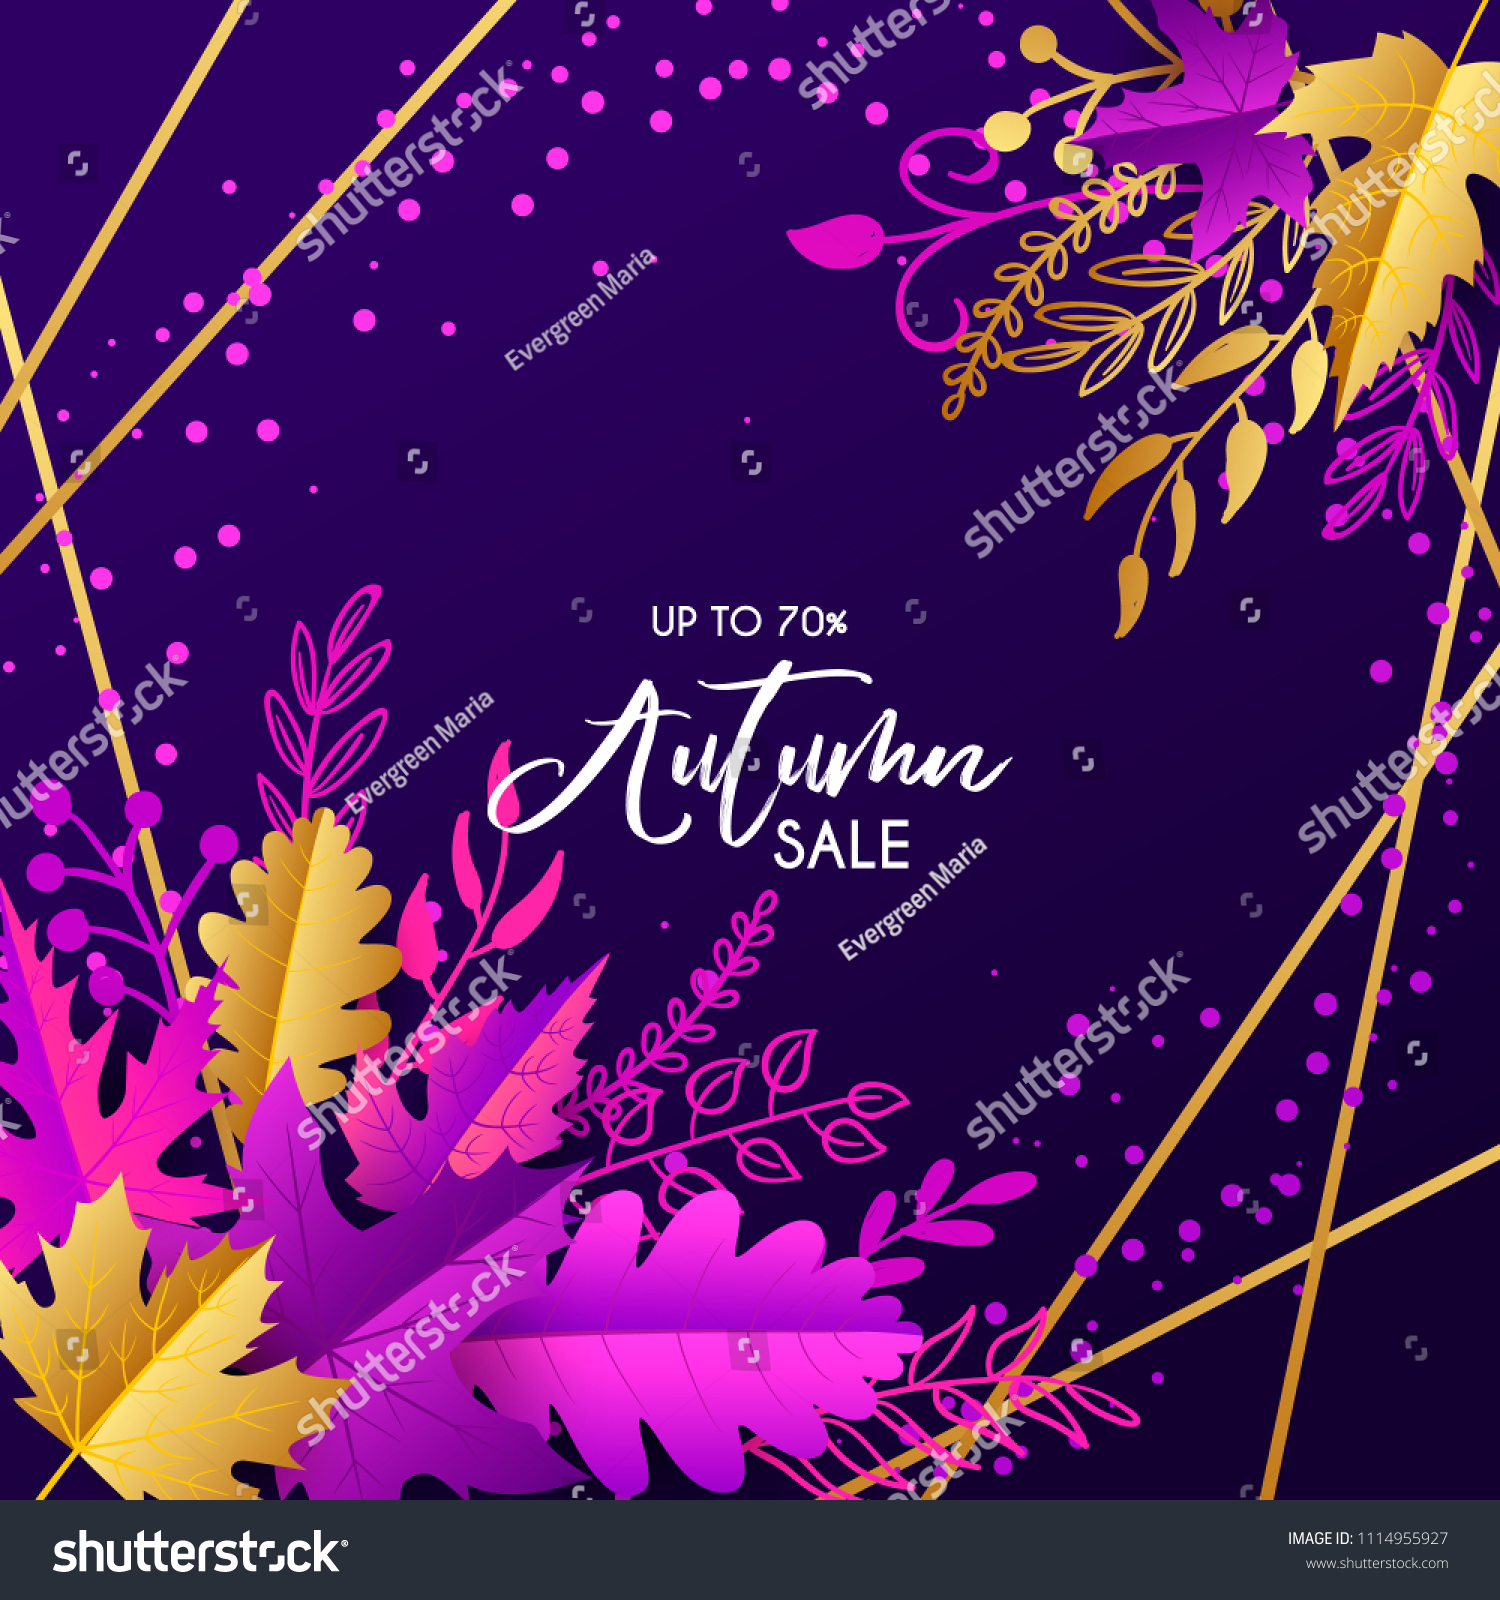 Vector autumn sale banner with hand drawn lettering and leaves. Design template for banner, flyer, poster, menu, tag, promotion. Vector illustration, purple, gold, orange. #1114955927